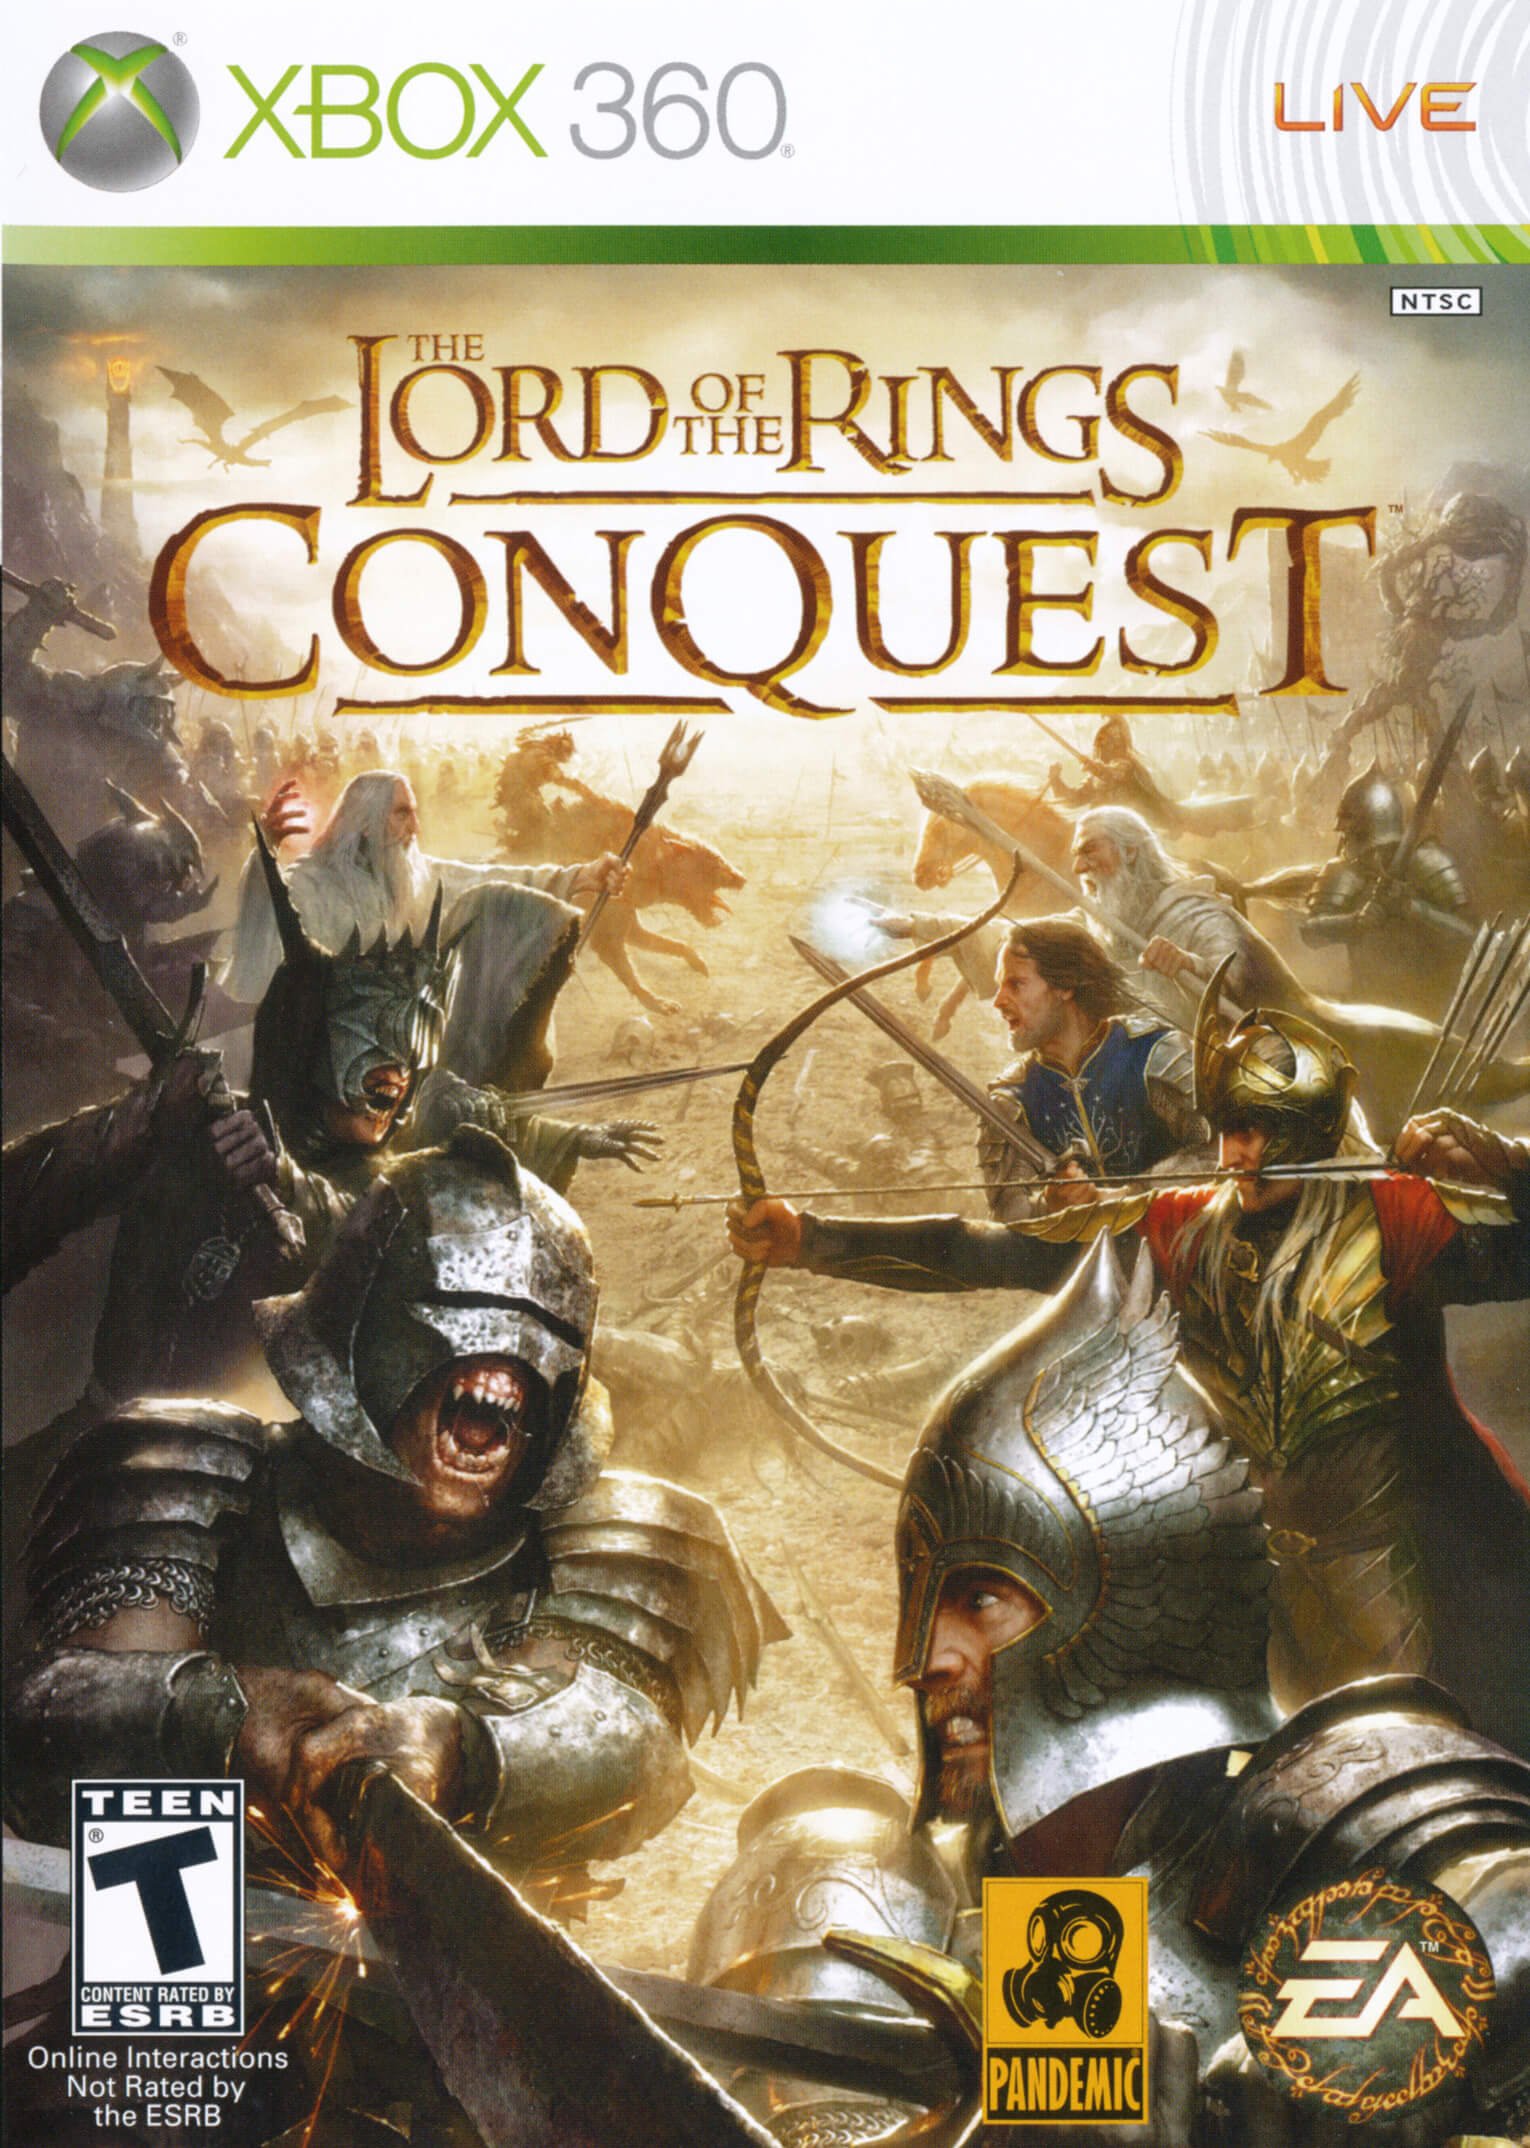 The Lord of the Rings: Conquest ROM & ISO - XBOX 360 Game